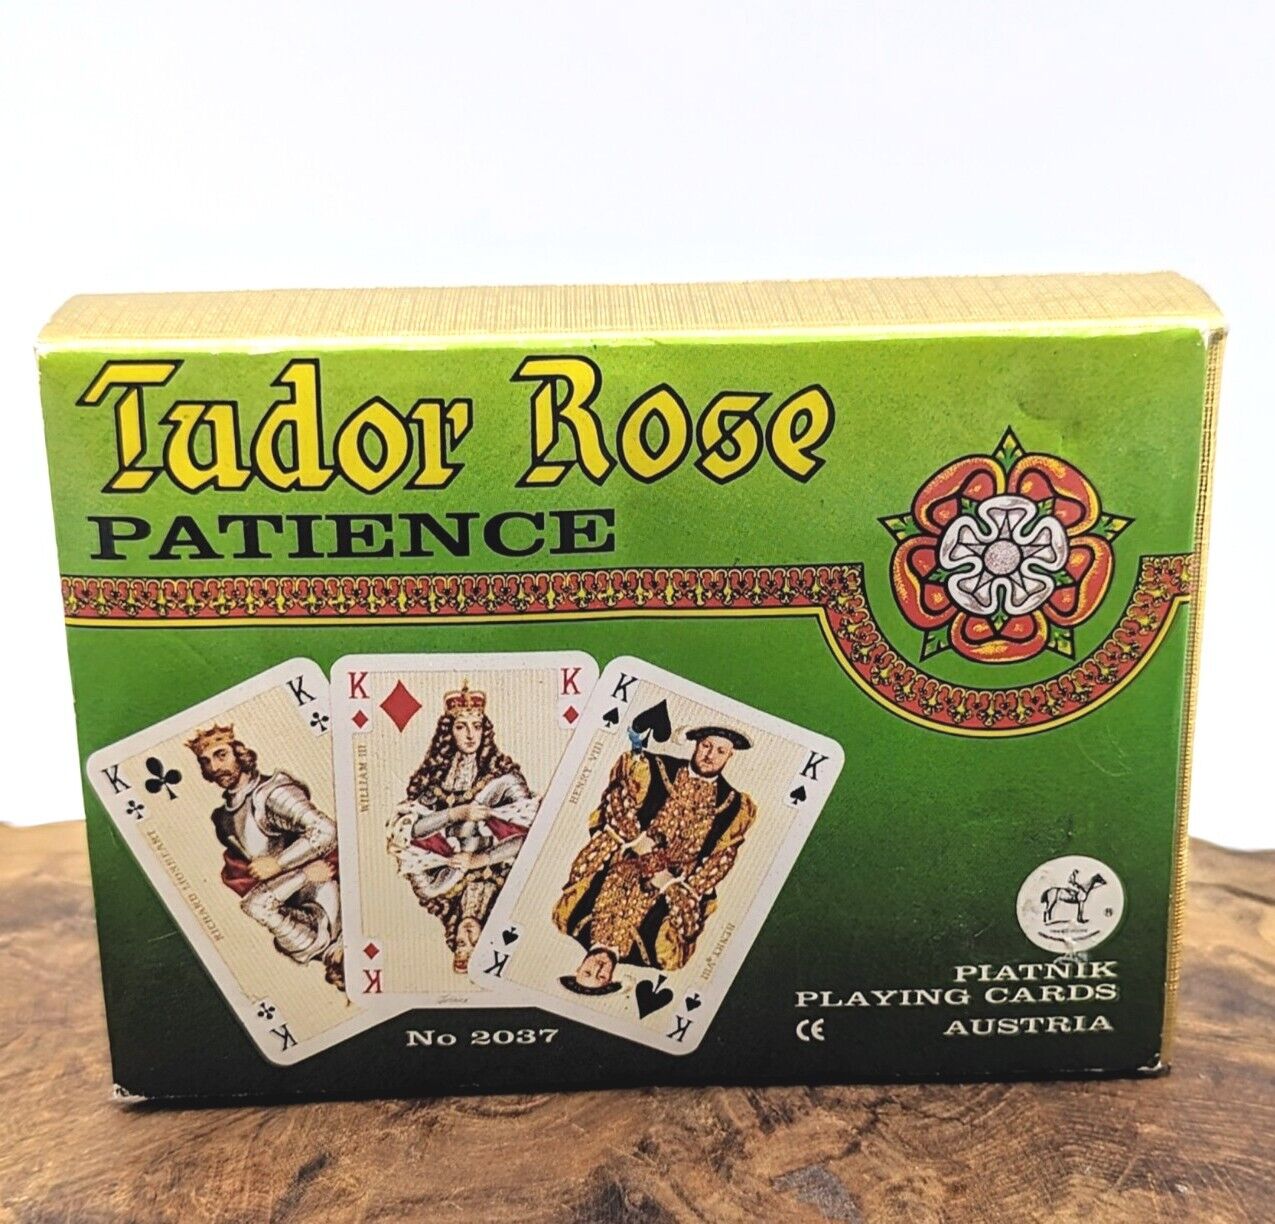 Tudor Rose Patience Piatnik Playing Cards With Instructions 2037 Made In Austria